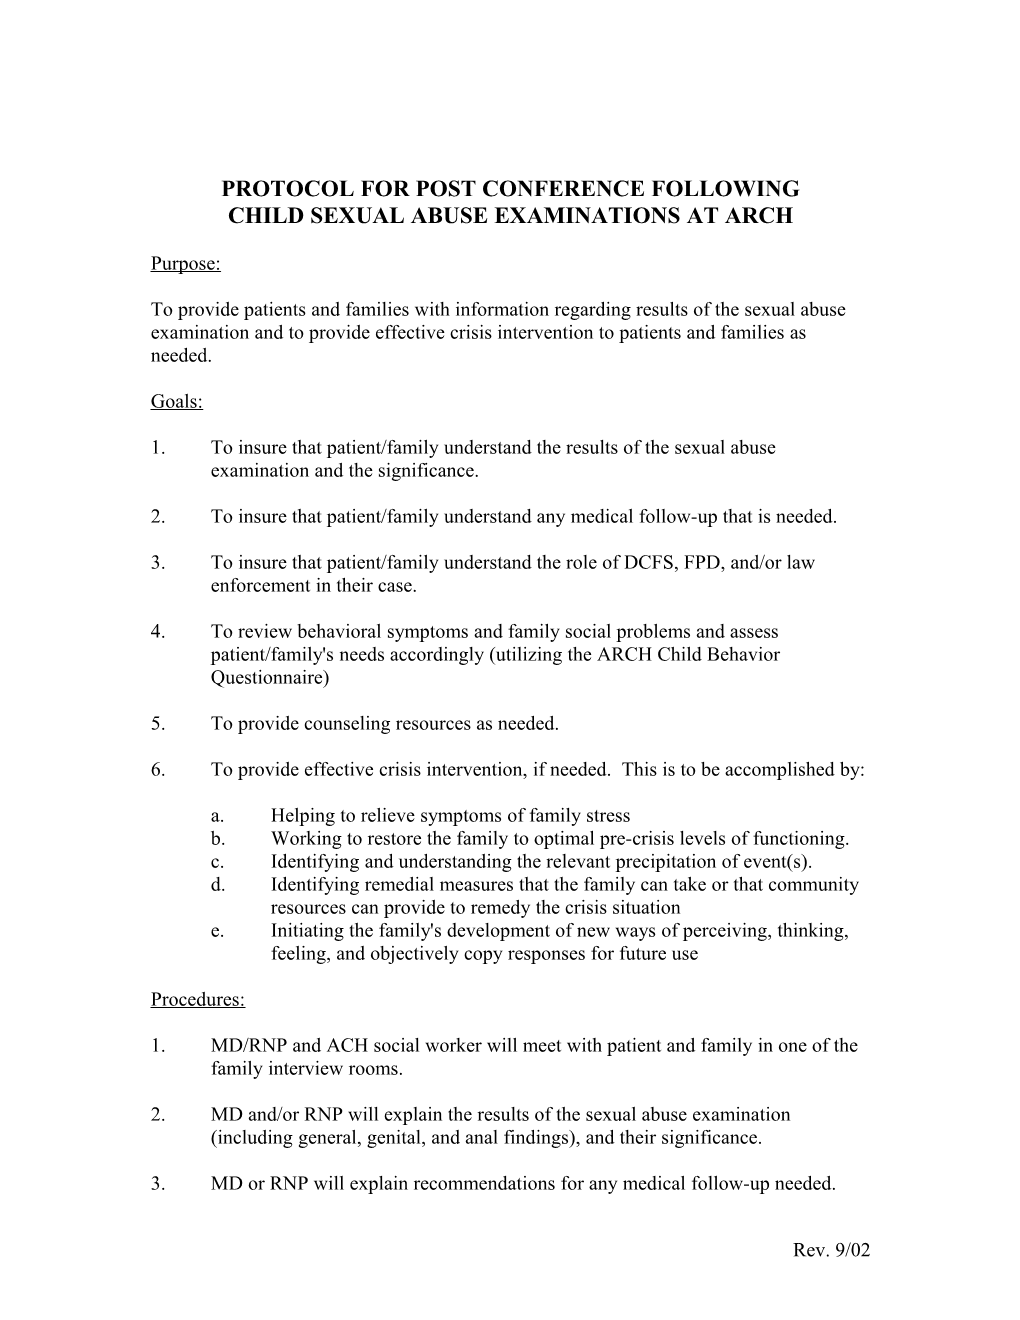 Protocol for Post Conference Following